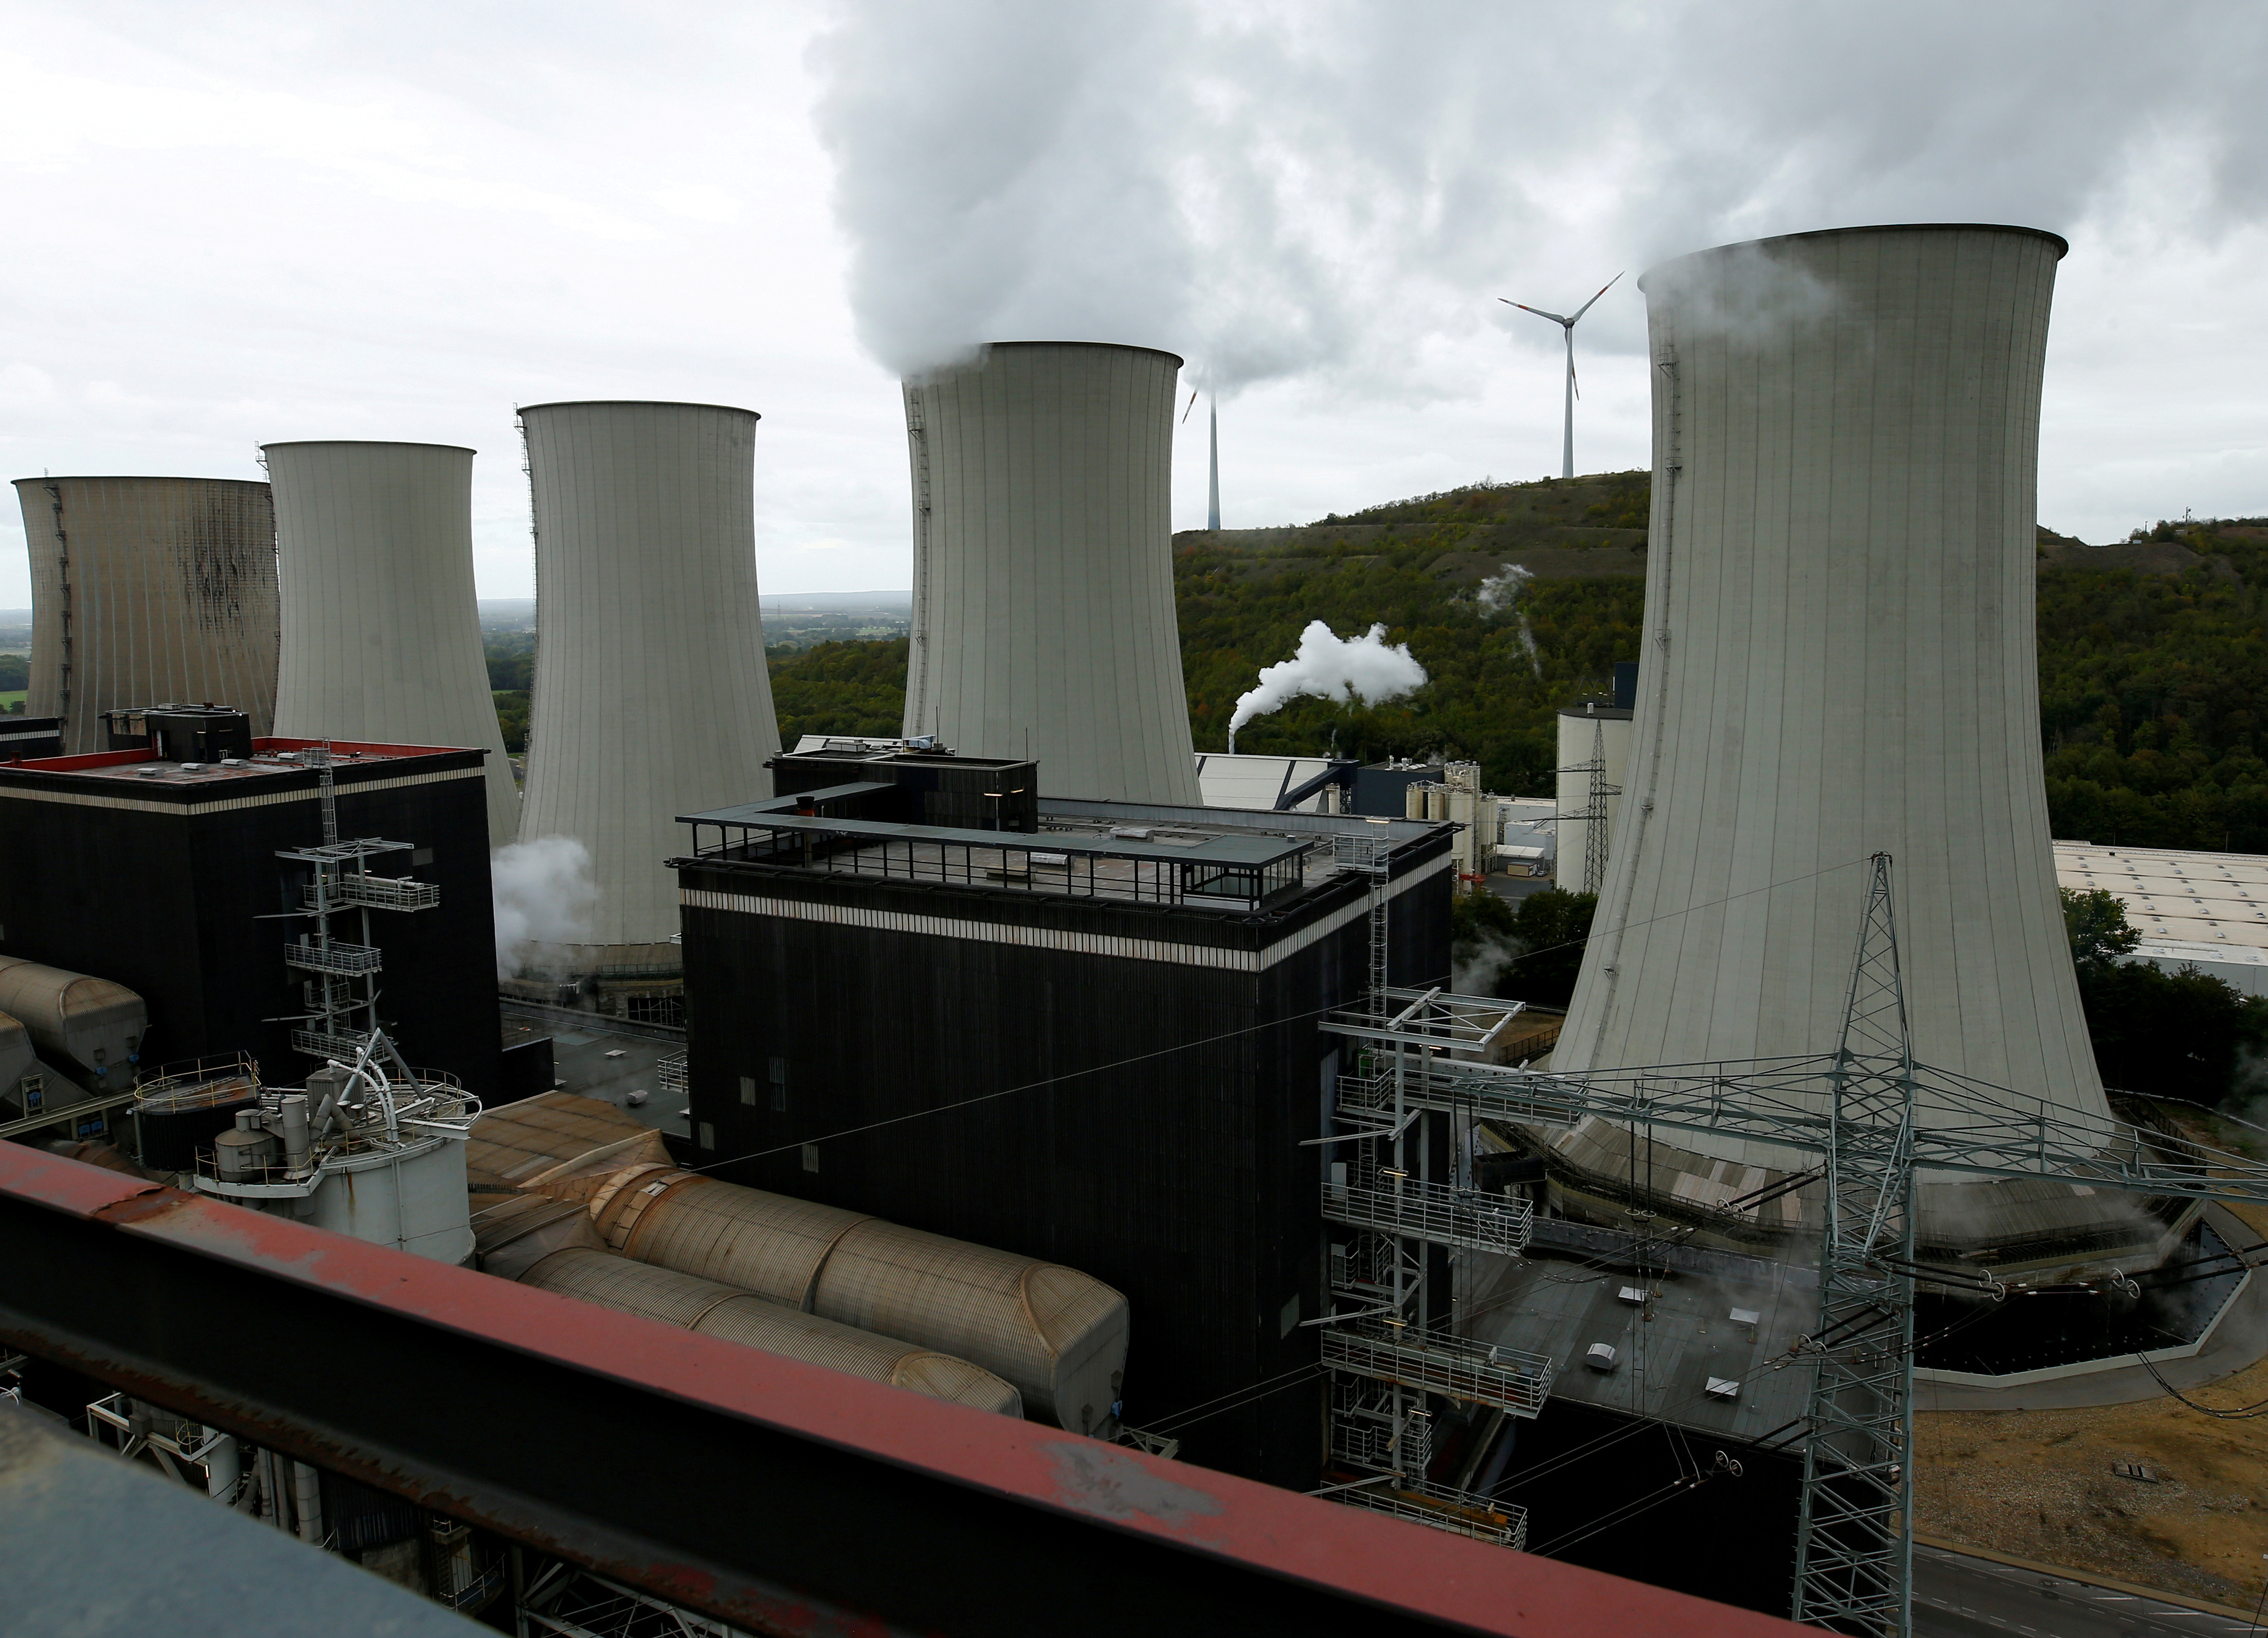 Uniper's Scholven coal power plant is pictured in Gelsenkirchen, Germany